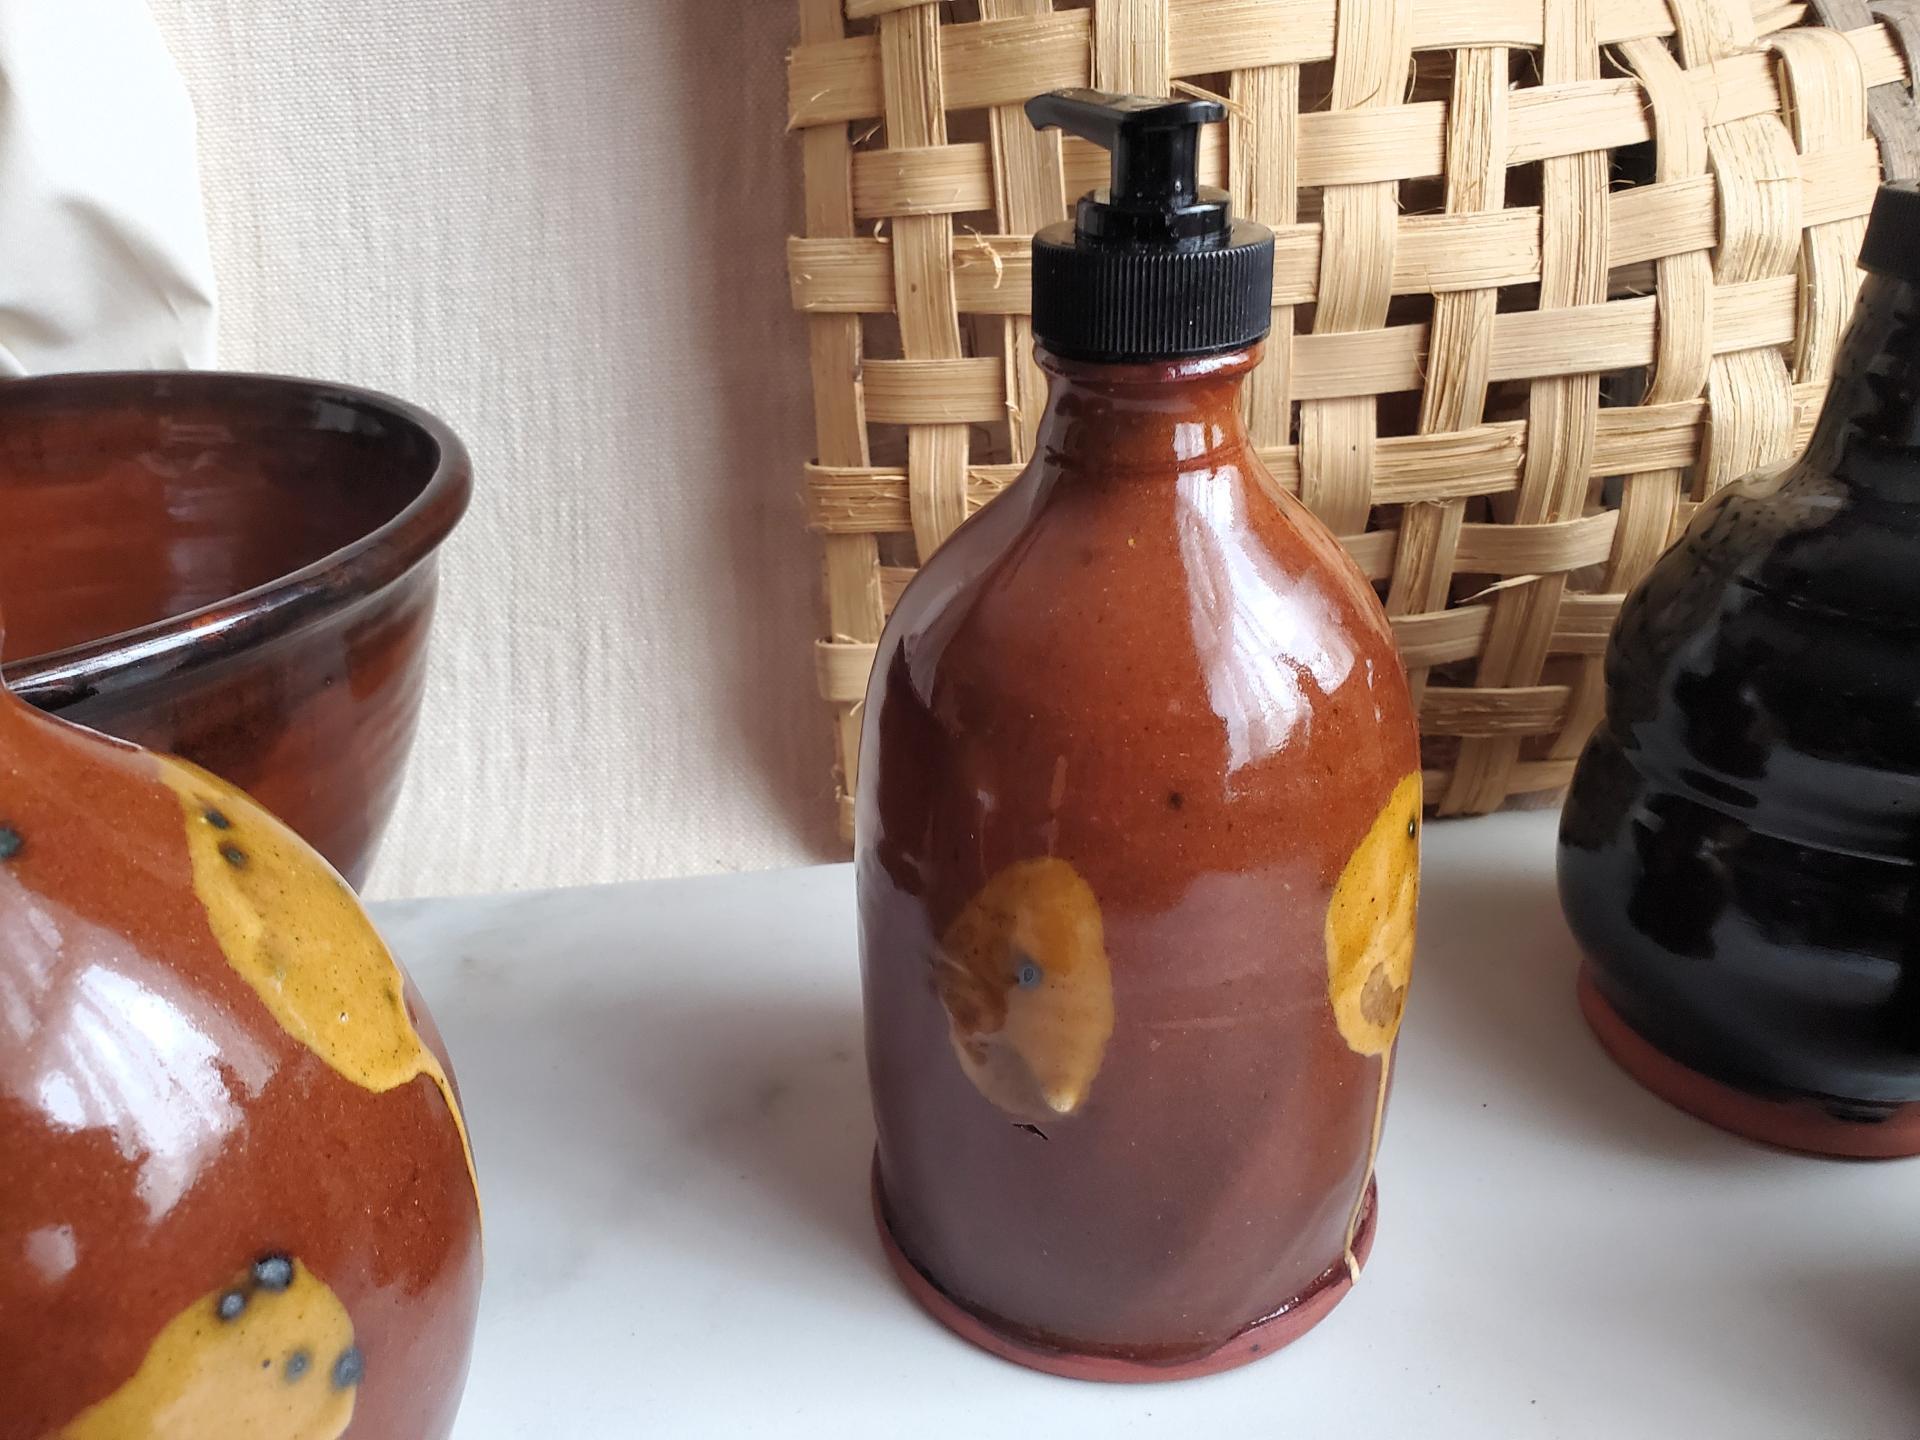 Elegant Redware Soap or Lotion Pump Dispenser Bottle, Handmade, Featuring Spangles and Splotches (b)